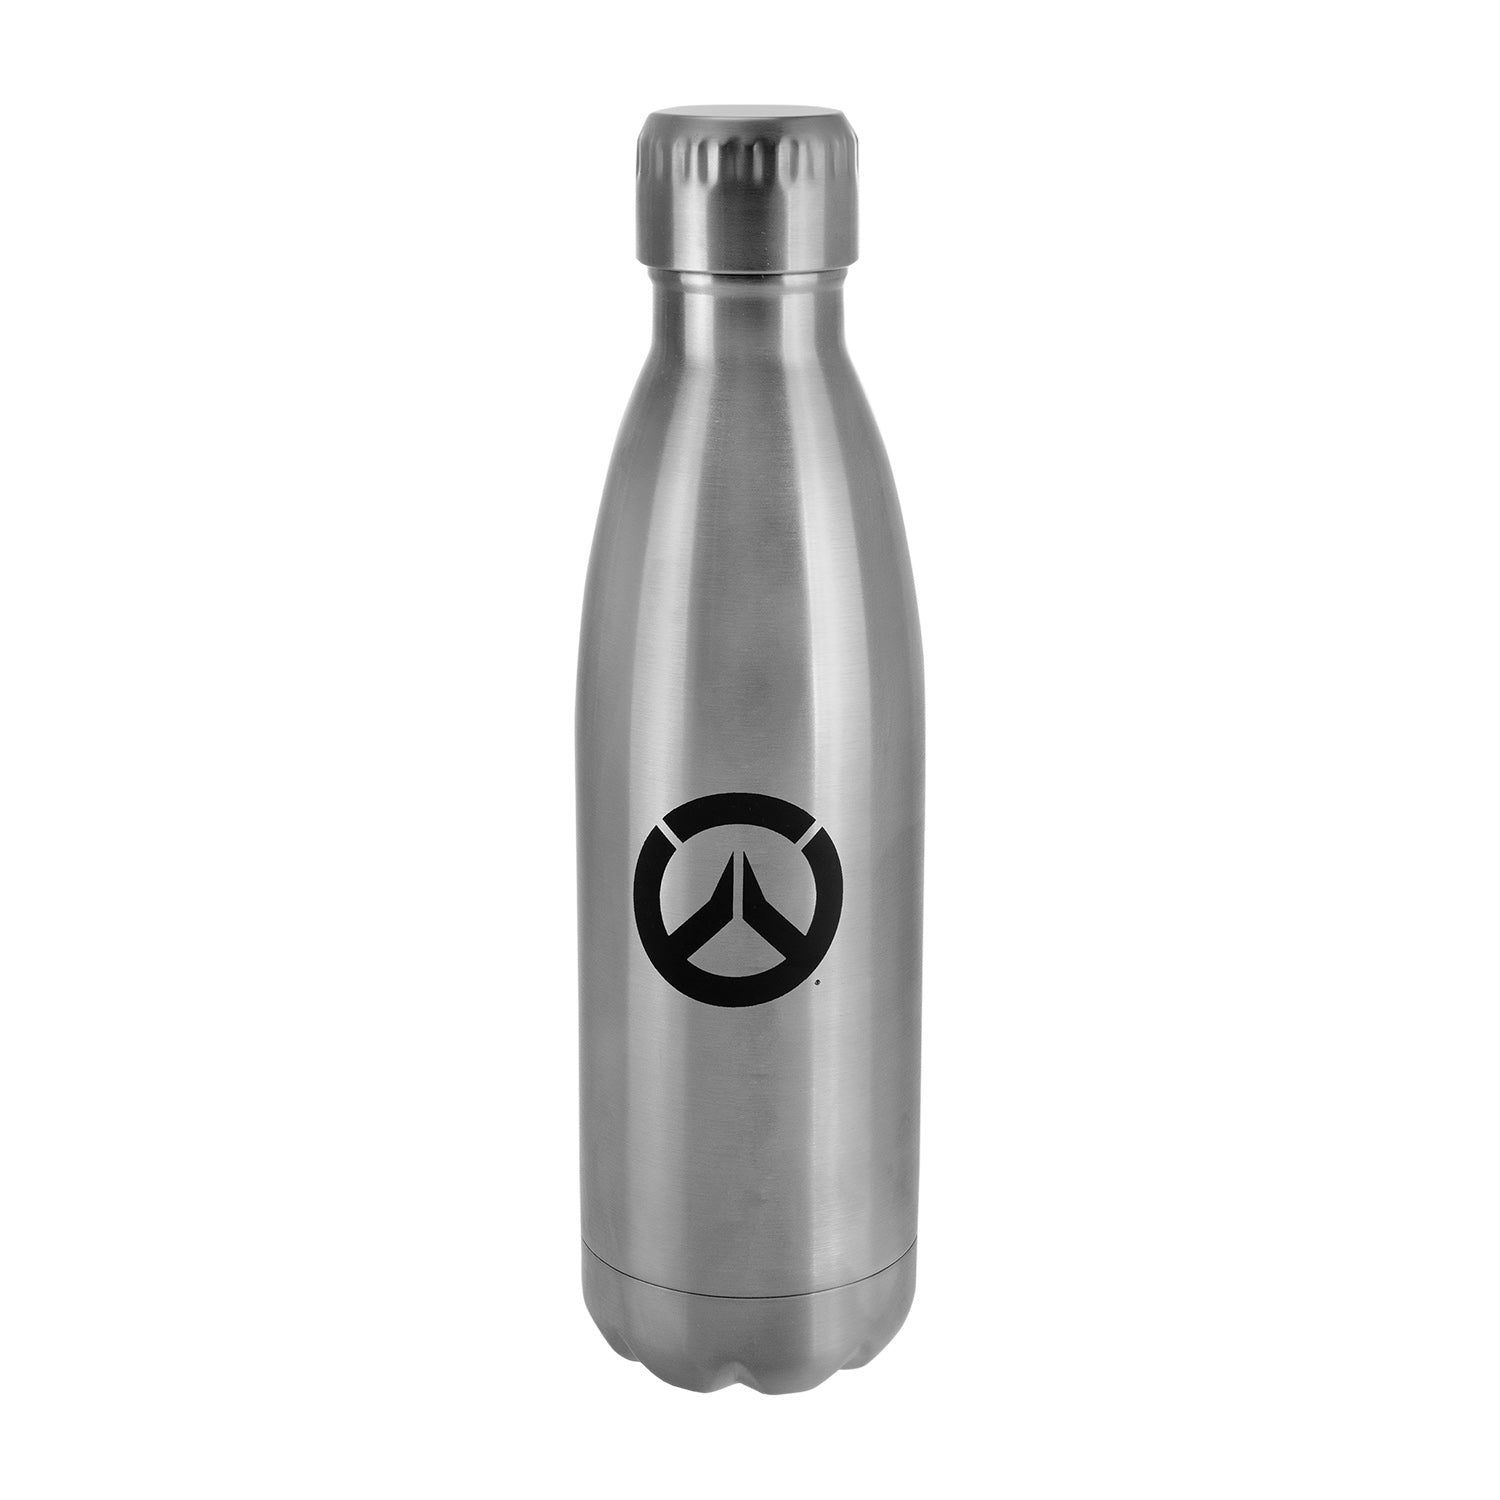 Overwatch 2 17oz Stainless Steel Water Bottle - Front View